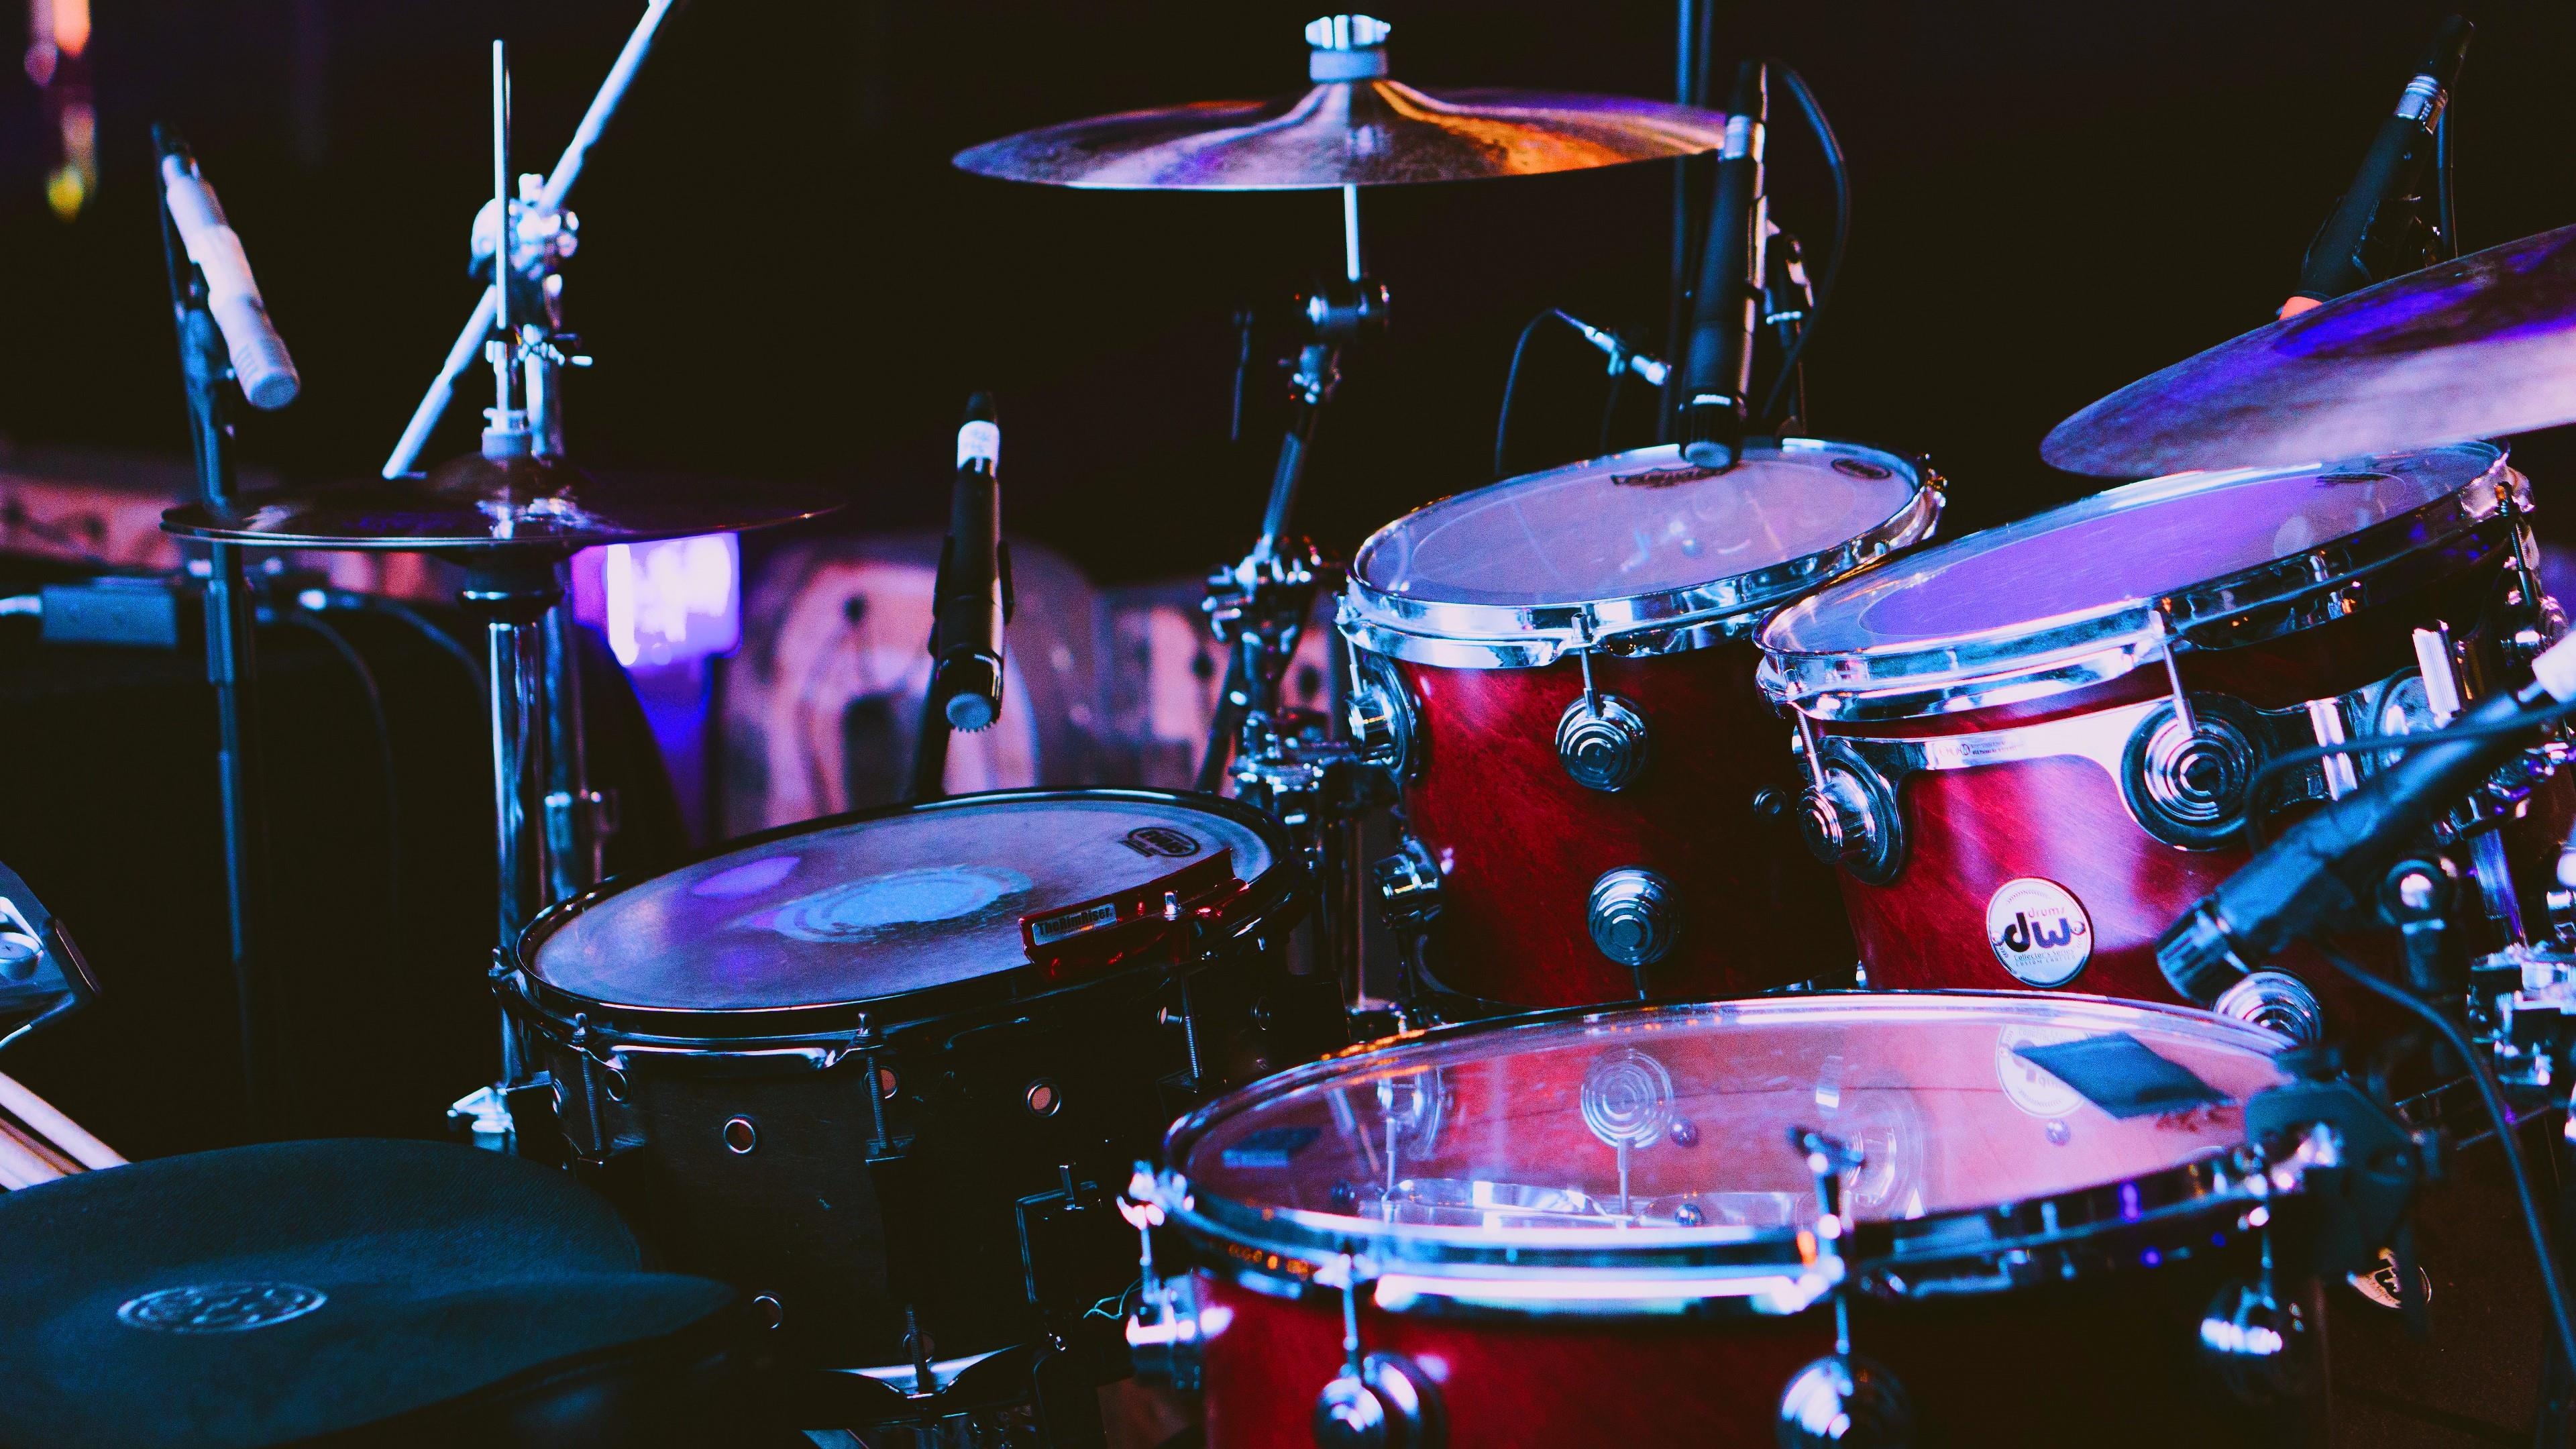 Drums: Instruments Prepared For The Concert, Band Playing, Show, Performance. 3840x2160 4K Background.